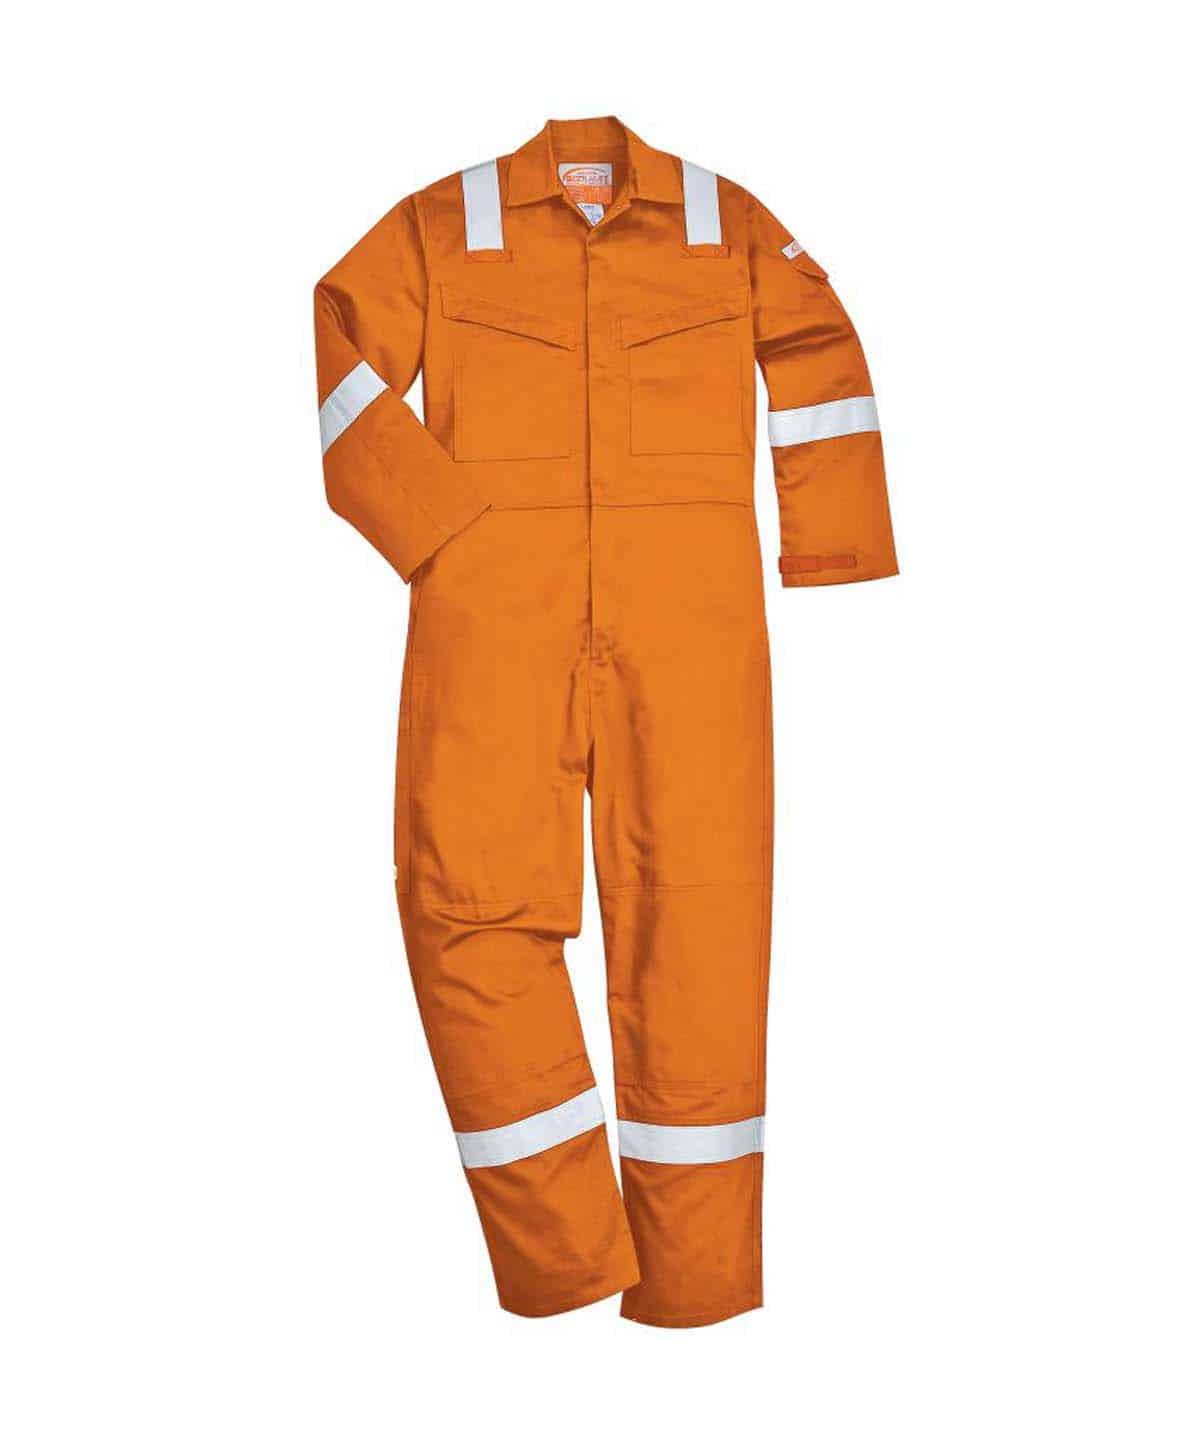 Bizweld Flame Resistant Coverall welding welder boilersuit Portwest overall size 